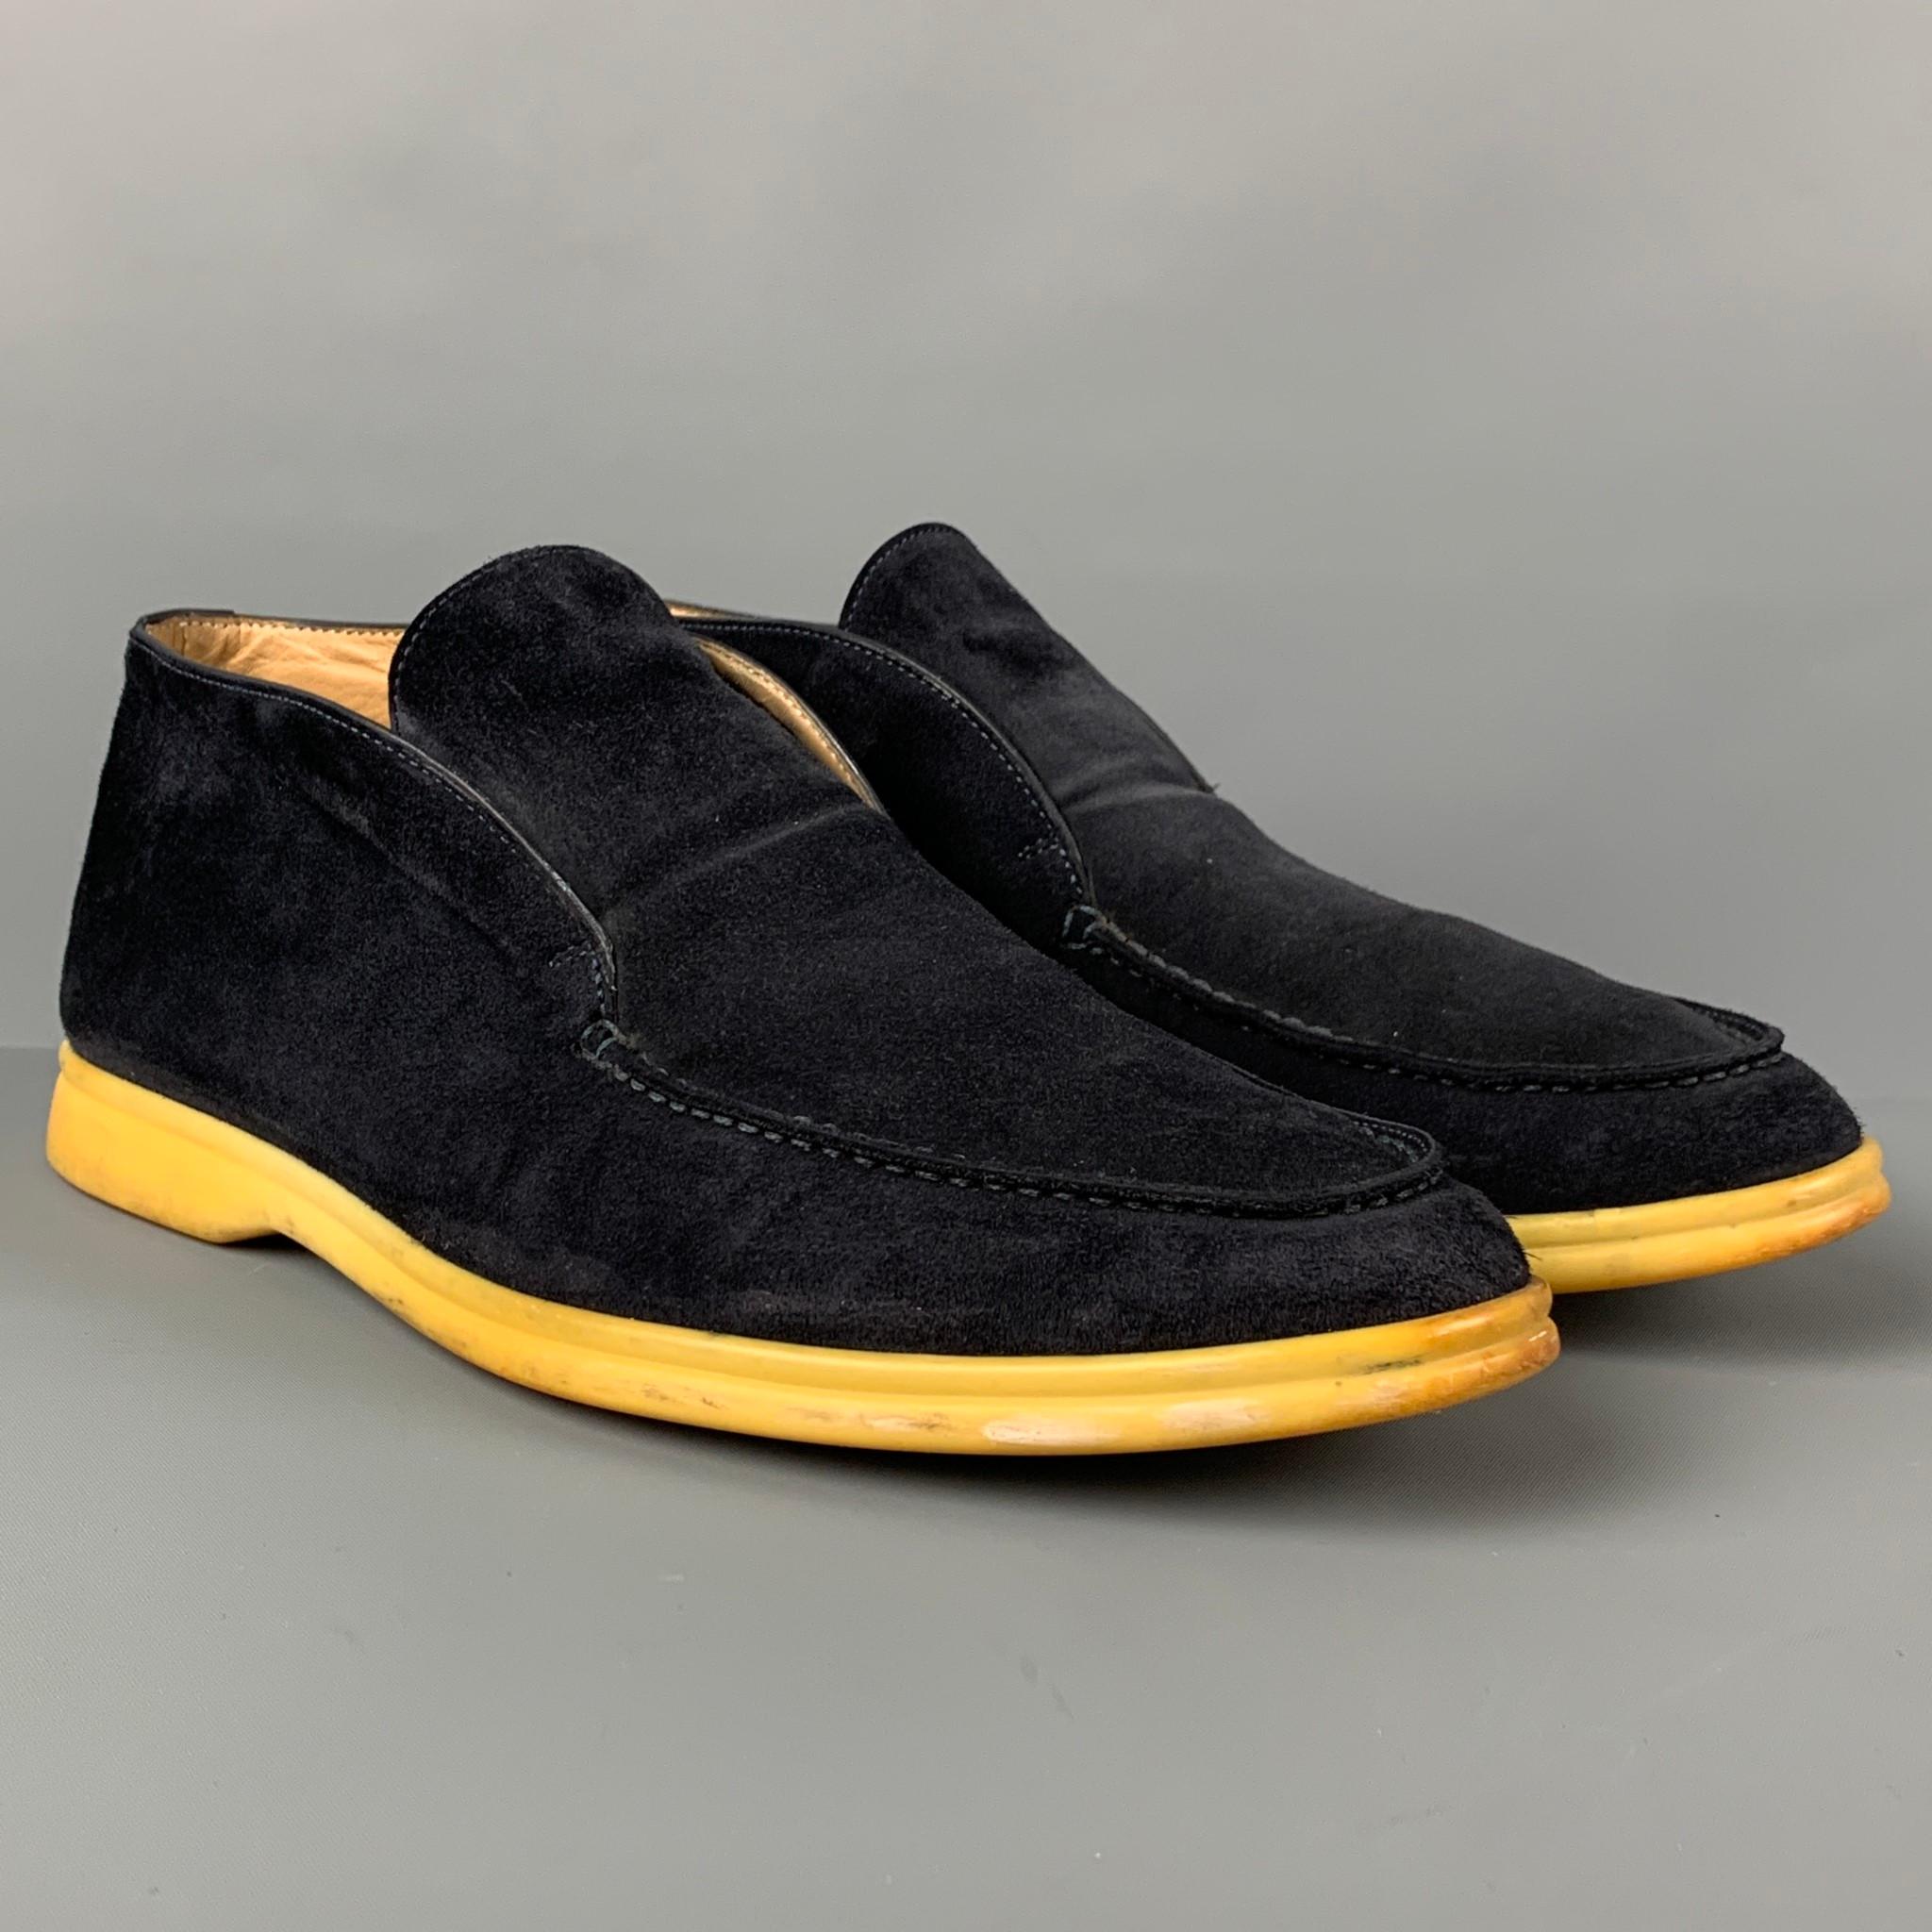 LORO PIANA boots comes in a navy suede with a yellow rubber sole featuring a chukka style. Made in Italy.

Very Good Pre-Owned Condition.
Marked: 42.5
Original Retail Price: $1,050.00

Measurements:

Length: 11.5 in.
Width: 4 in.
Height: 3 in. 